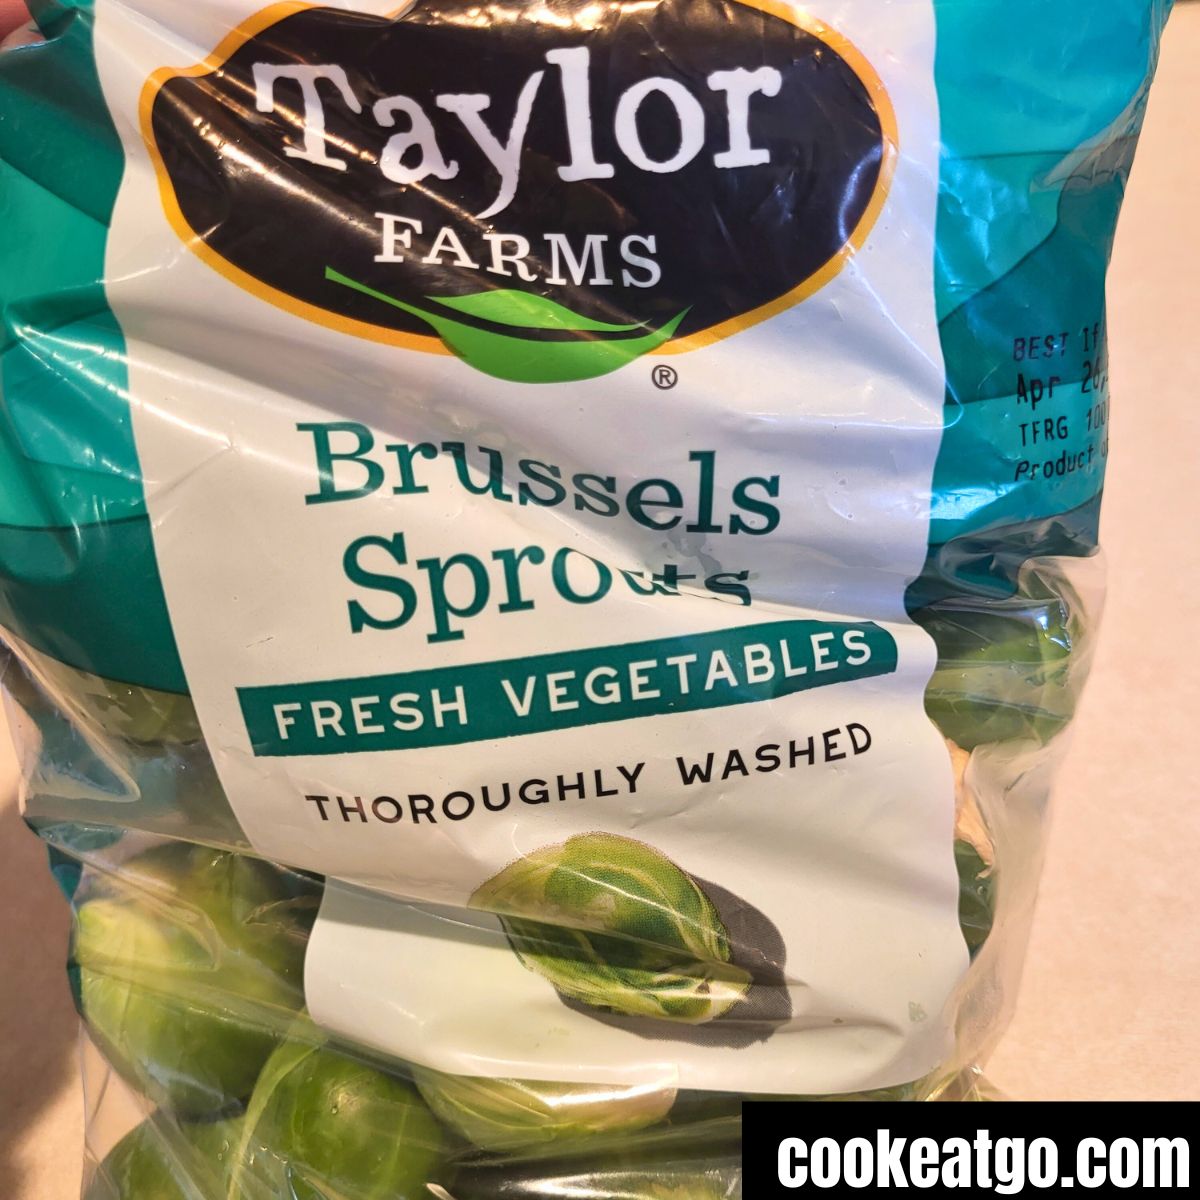 Taylor Farms bag of Brussel Sprouts